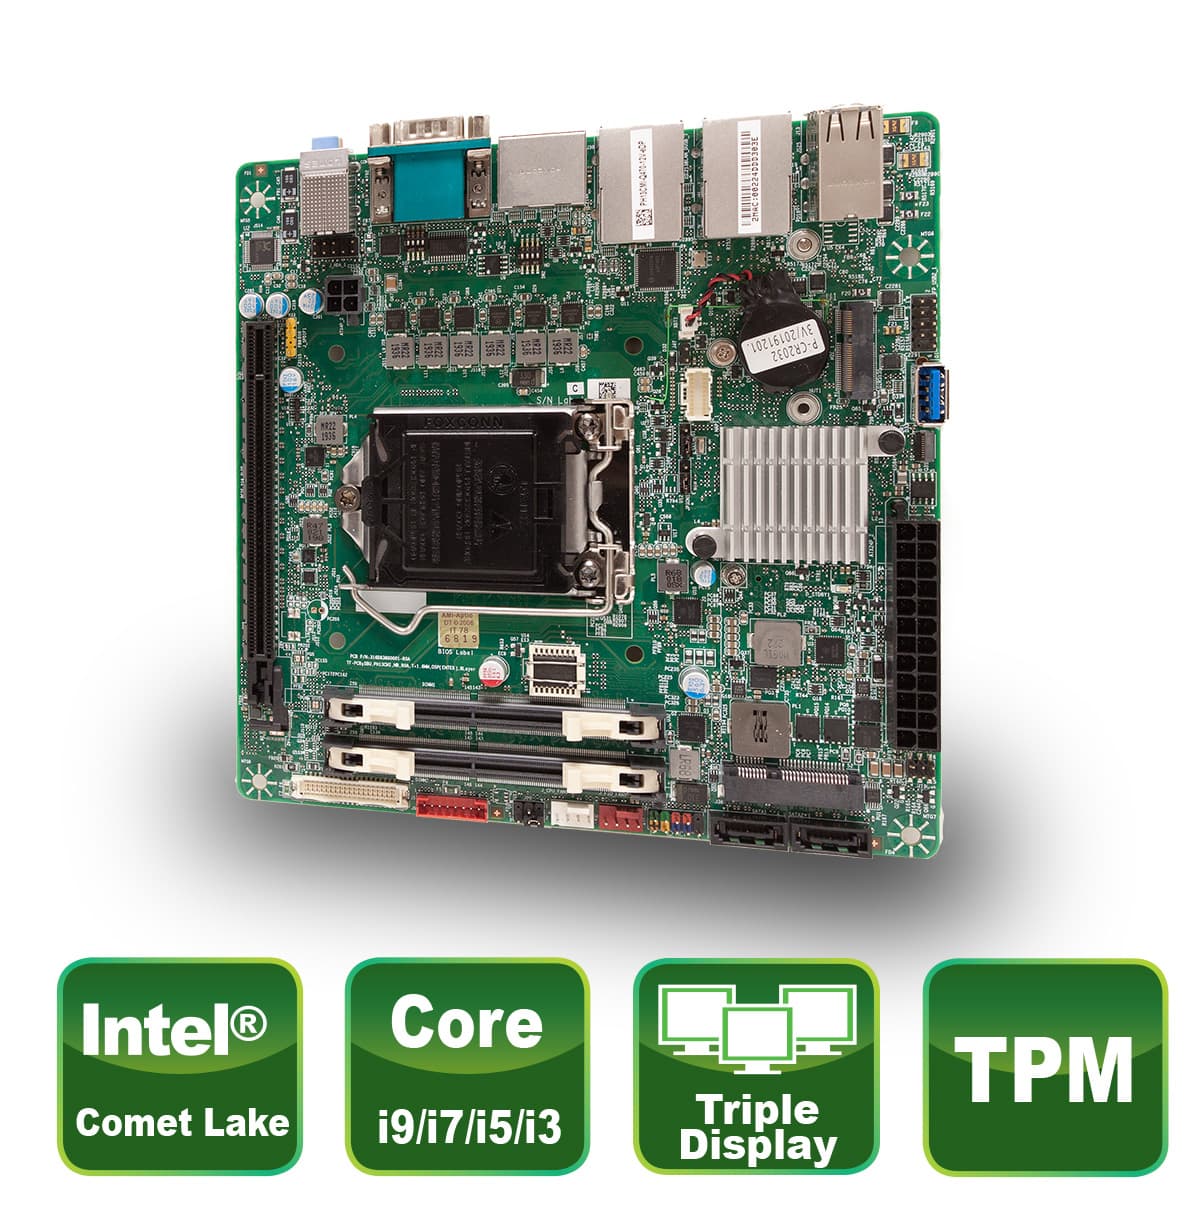 Classic Mini-ITX motherboards with Comet Lake CPU support